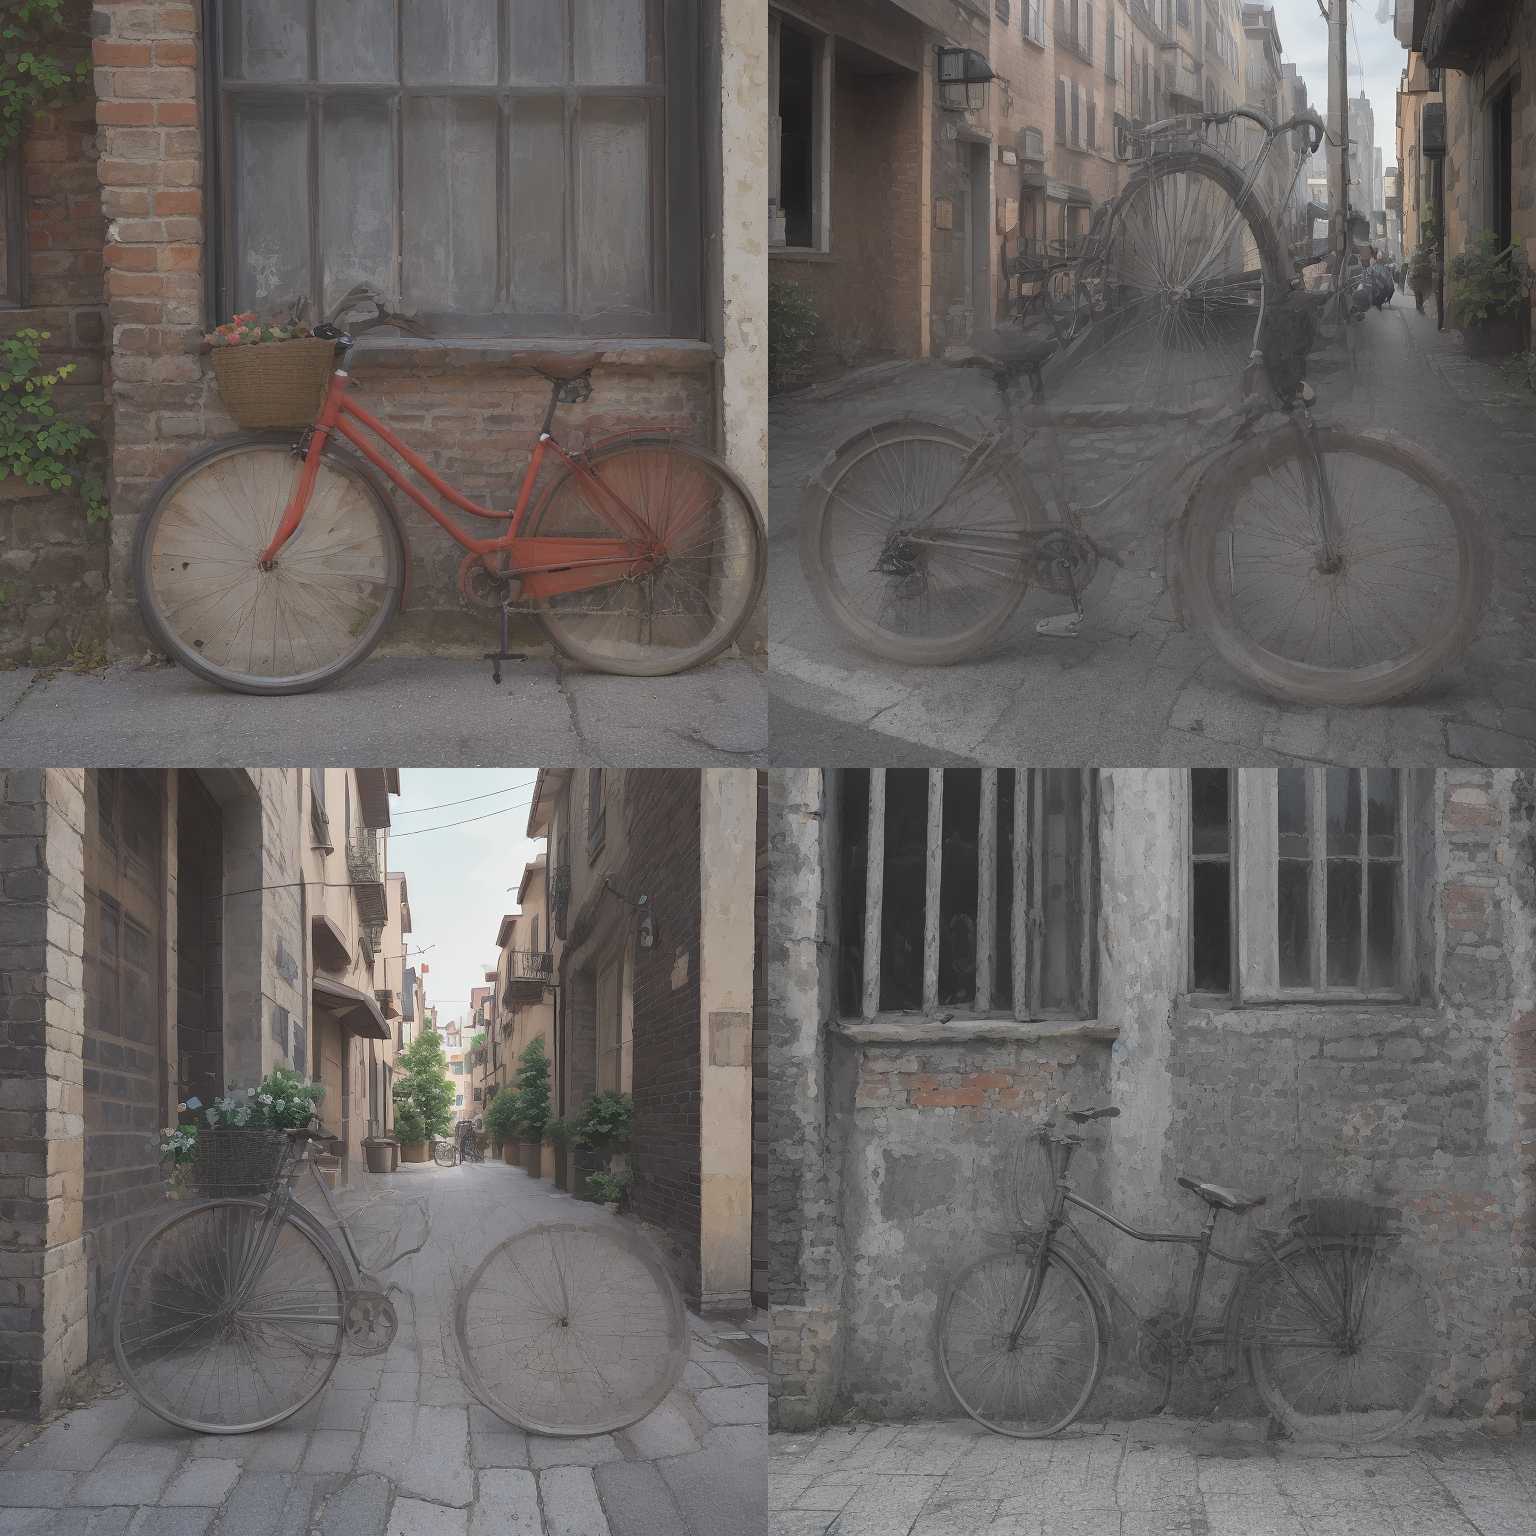 A bicycle